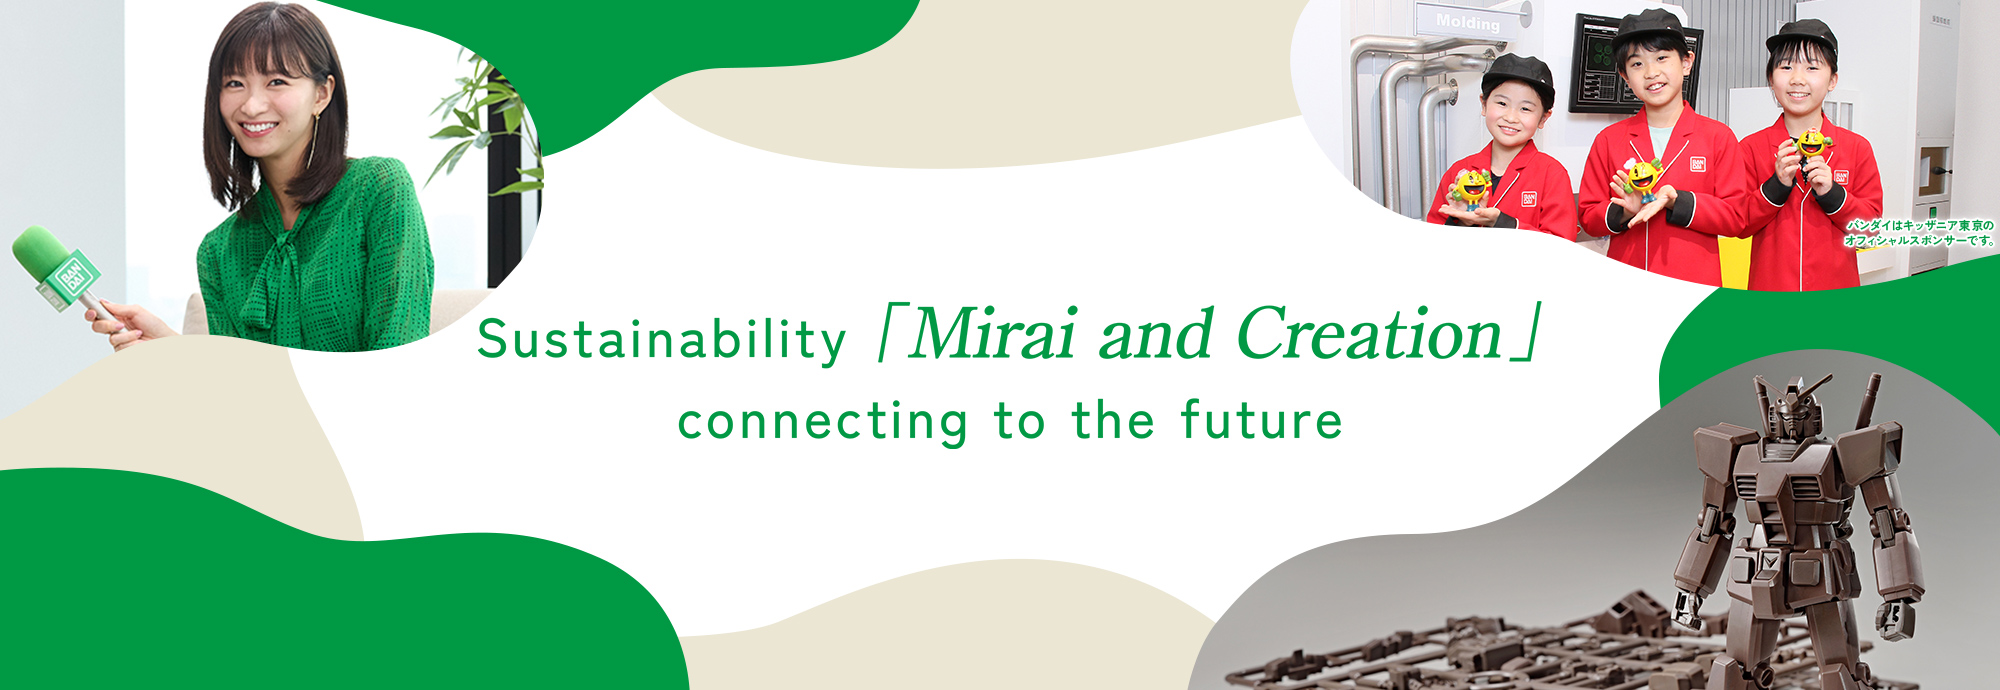 Sustainability 「Mirai and Creation」 connecting to the future